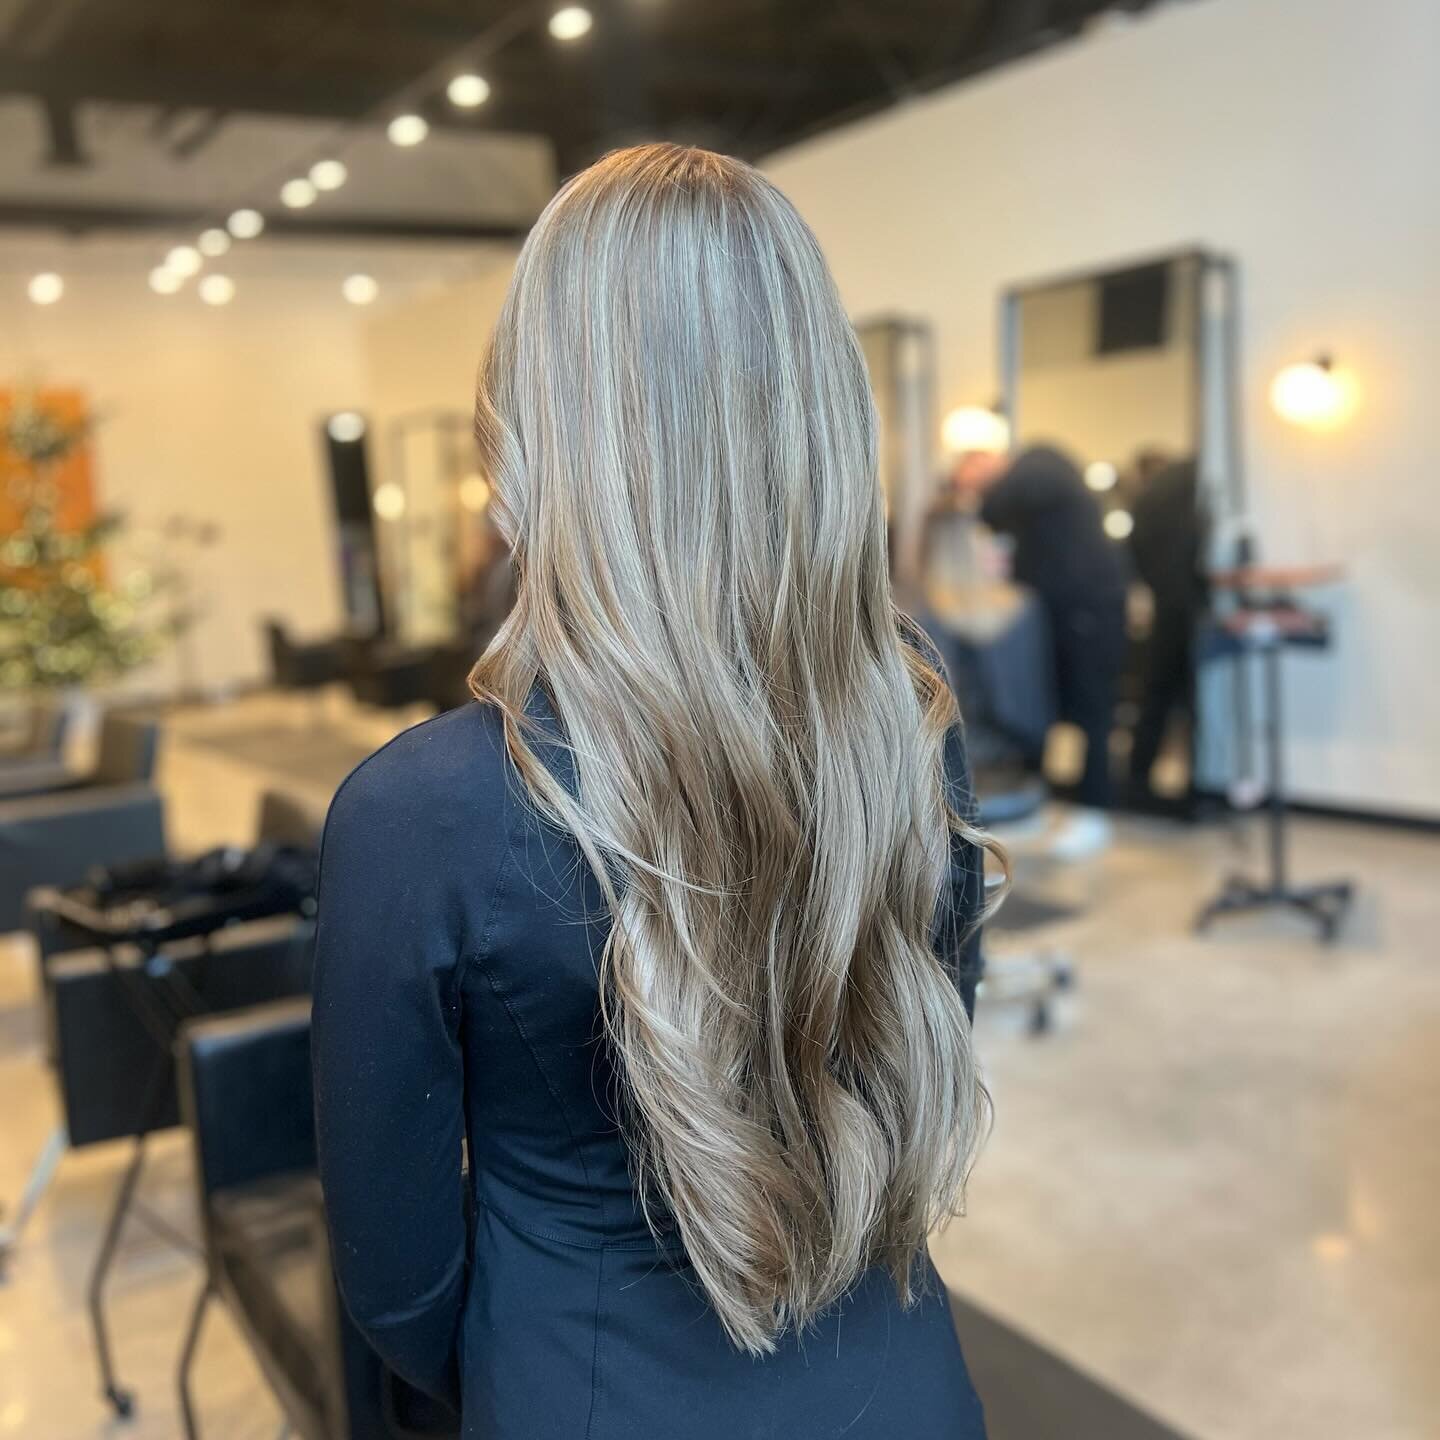 I just want to put out PSA on Sun In because I have had a few color corrections where the hair was too damaged to support highlights or it the tone was orange and brassy. The photo above is a best case scenario where the client just wanted to go back